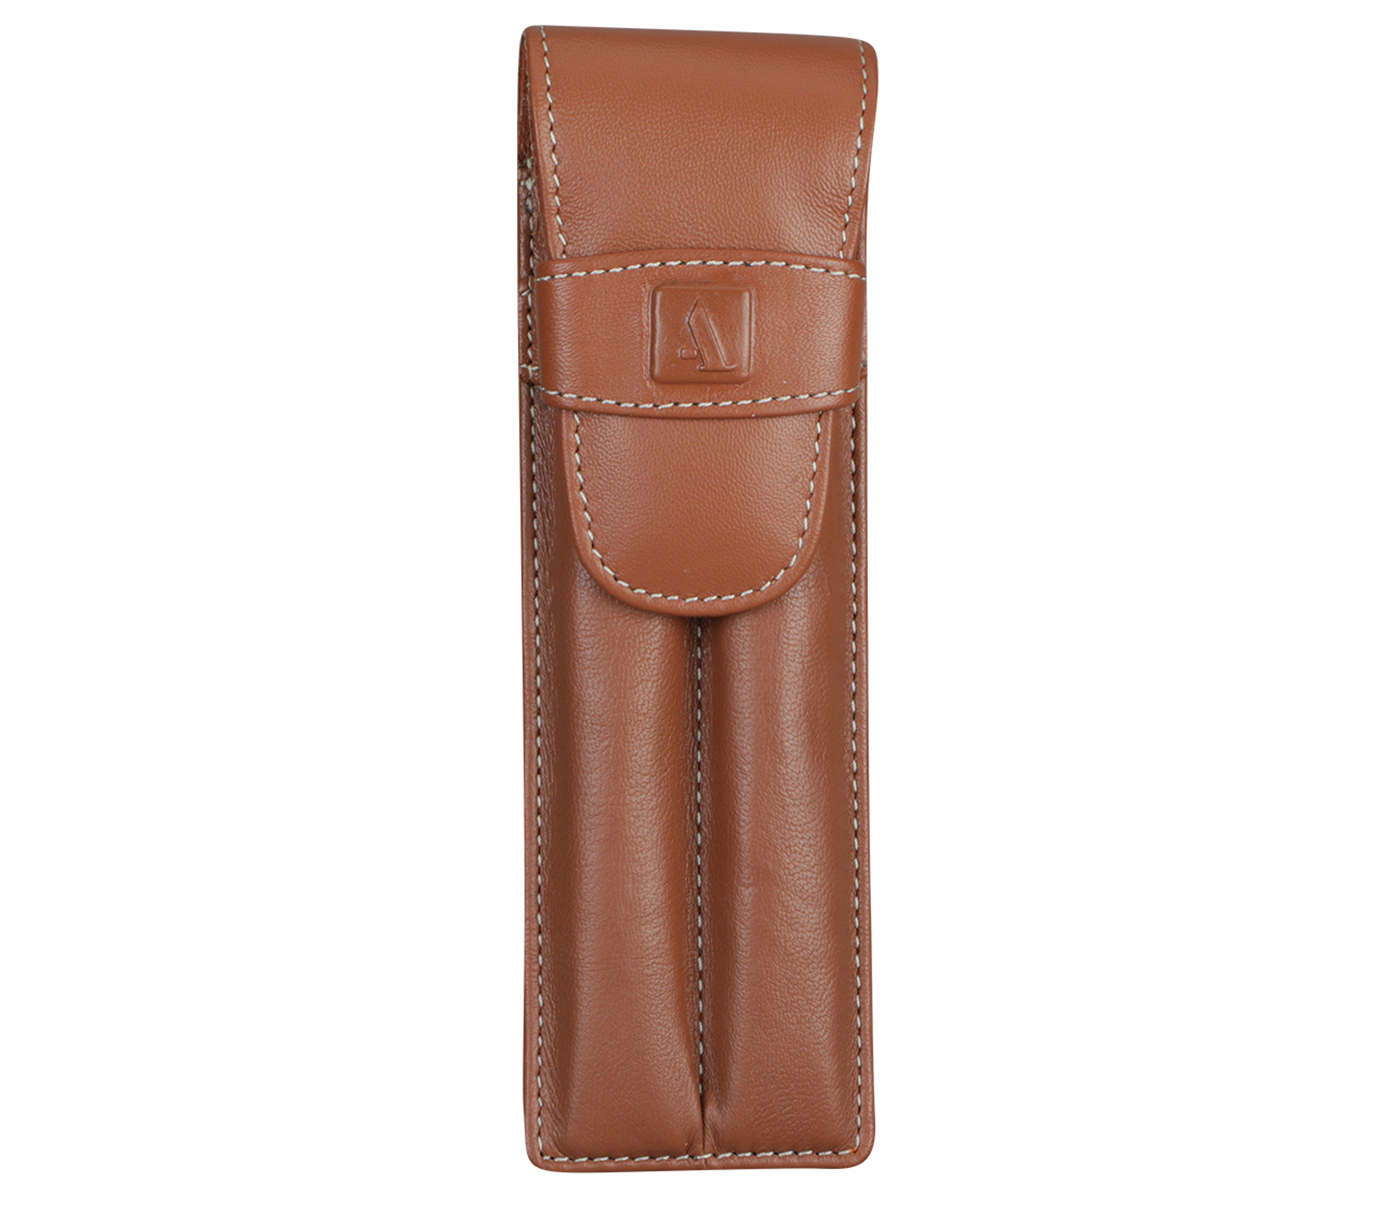 W51--Pen case to carry 2 pens in Genuine Leather - Tan